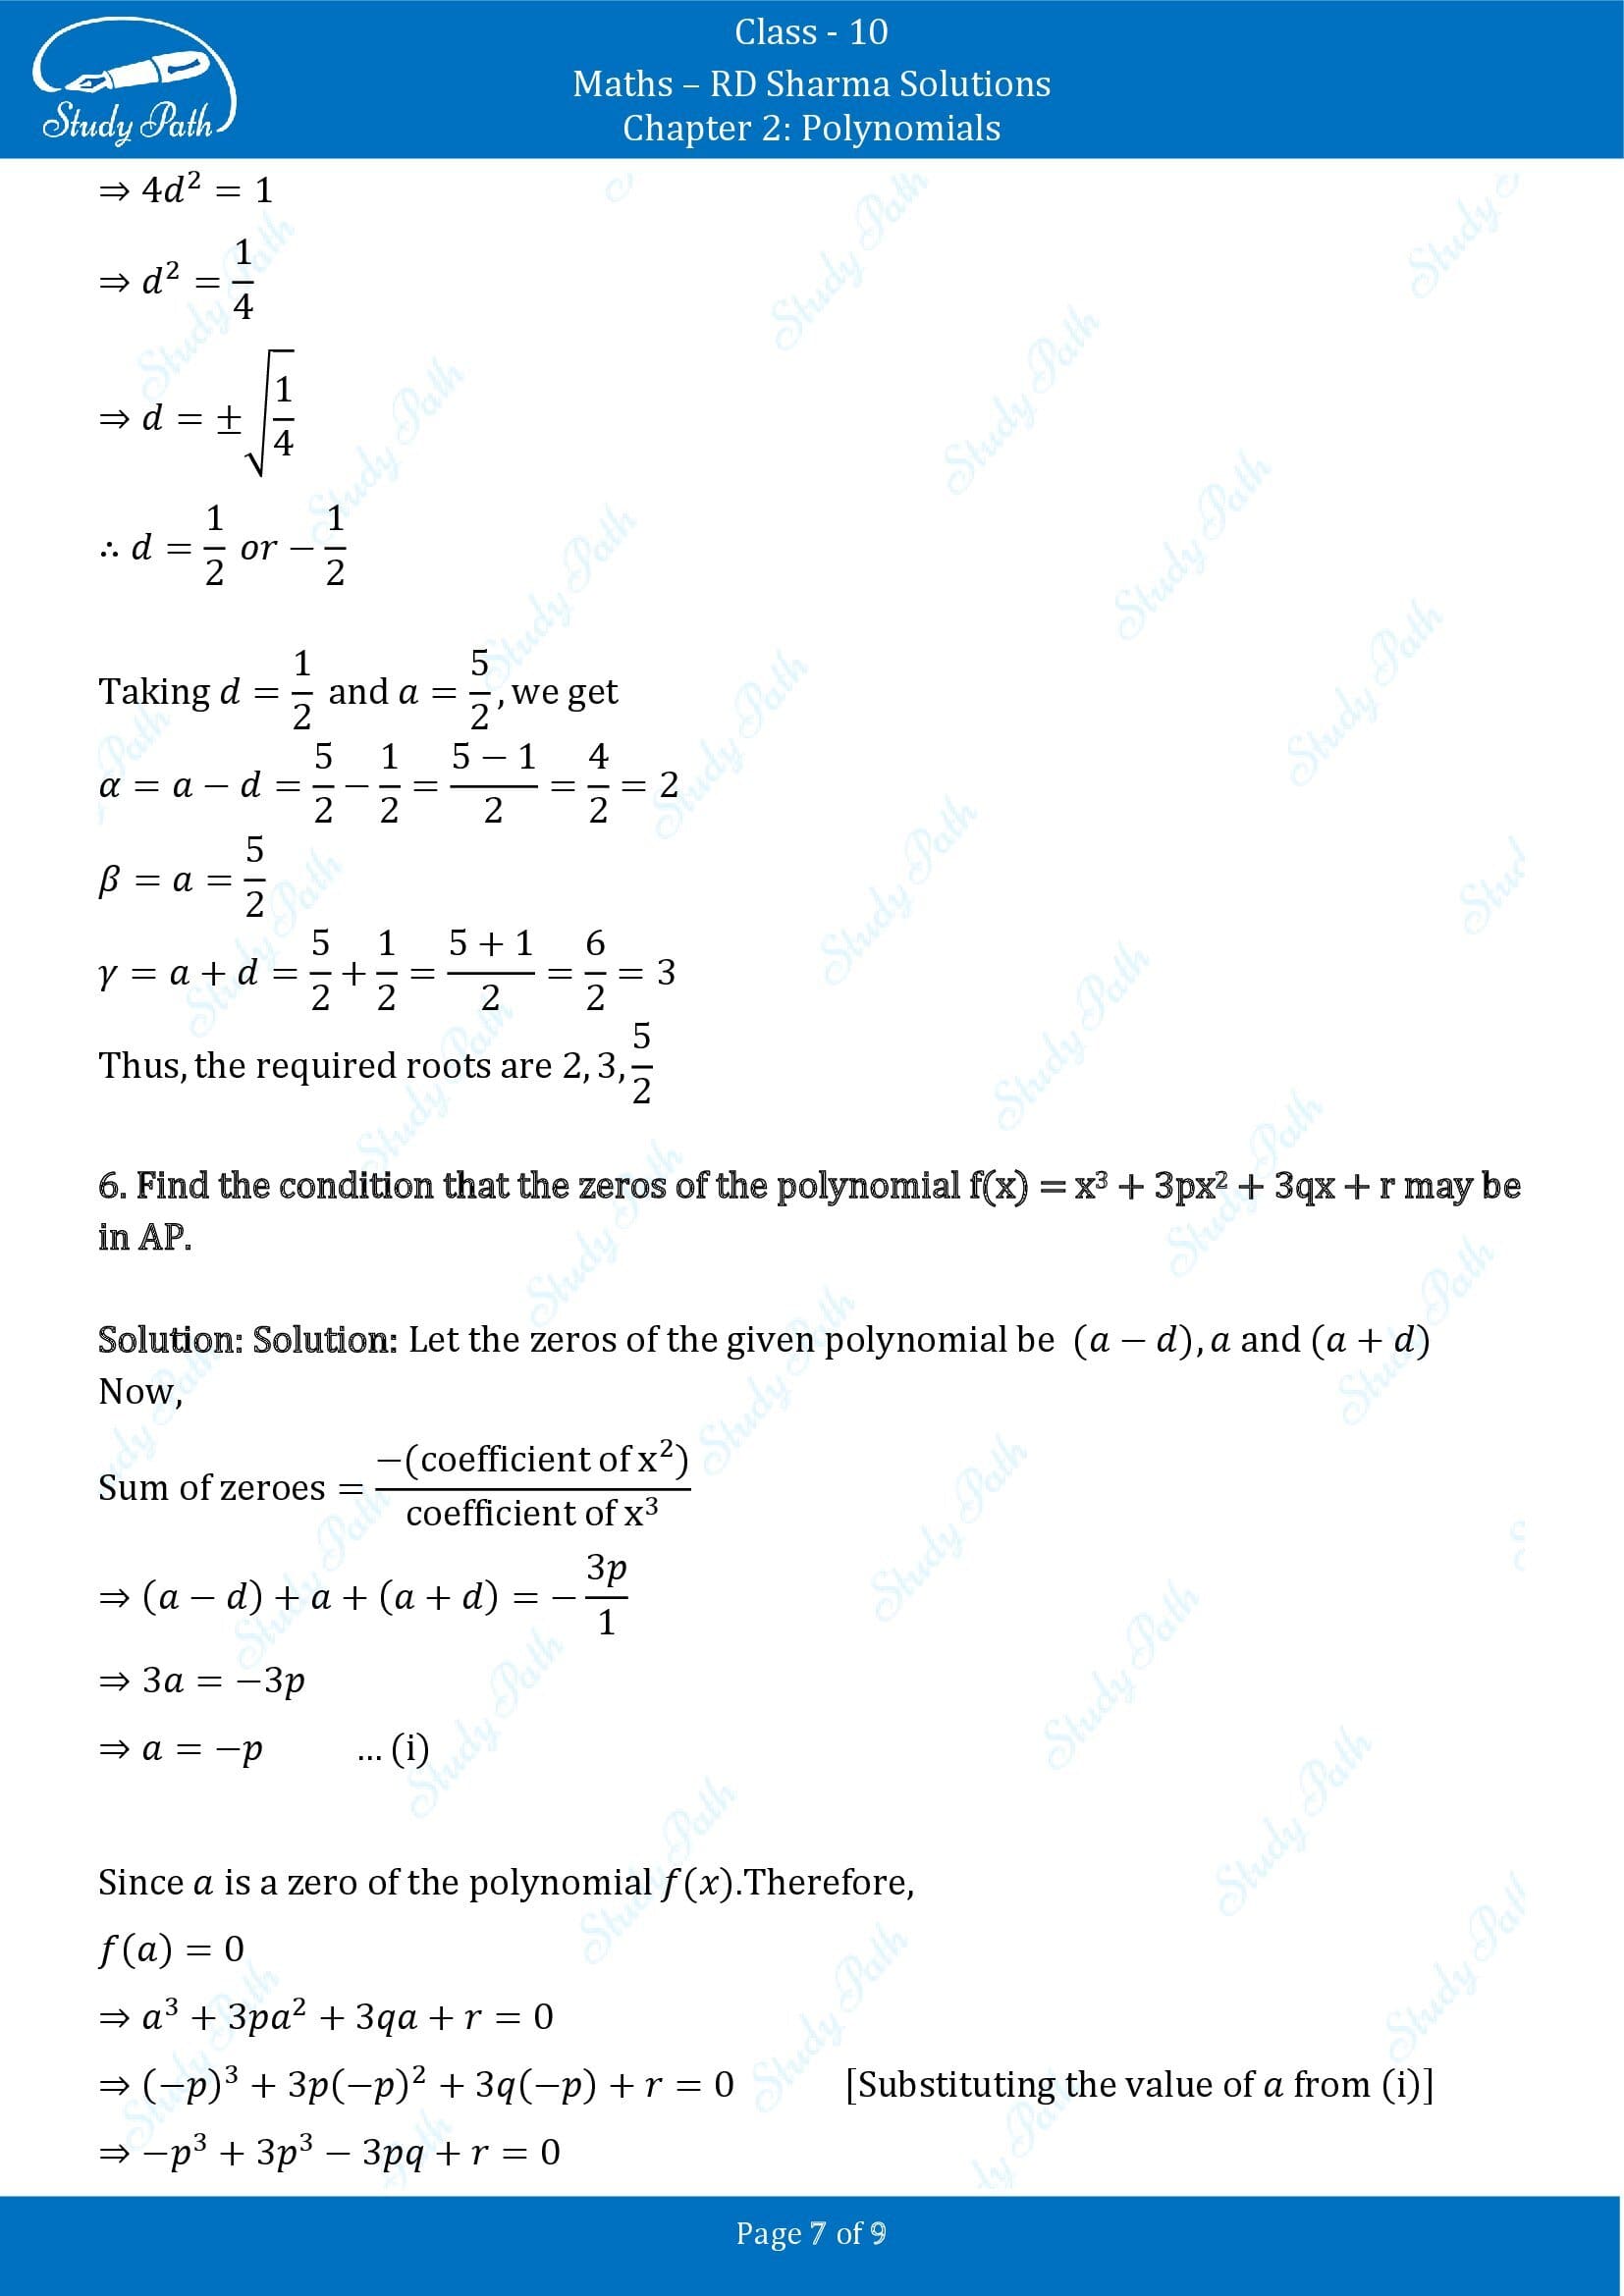 RD Sharma Solutions Class 10 Chapter 2 Polynomials Exercise 2.2 00007